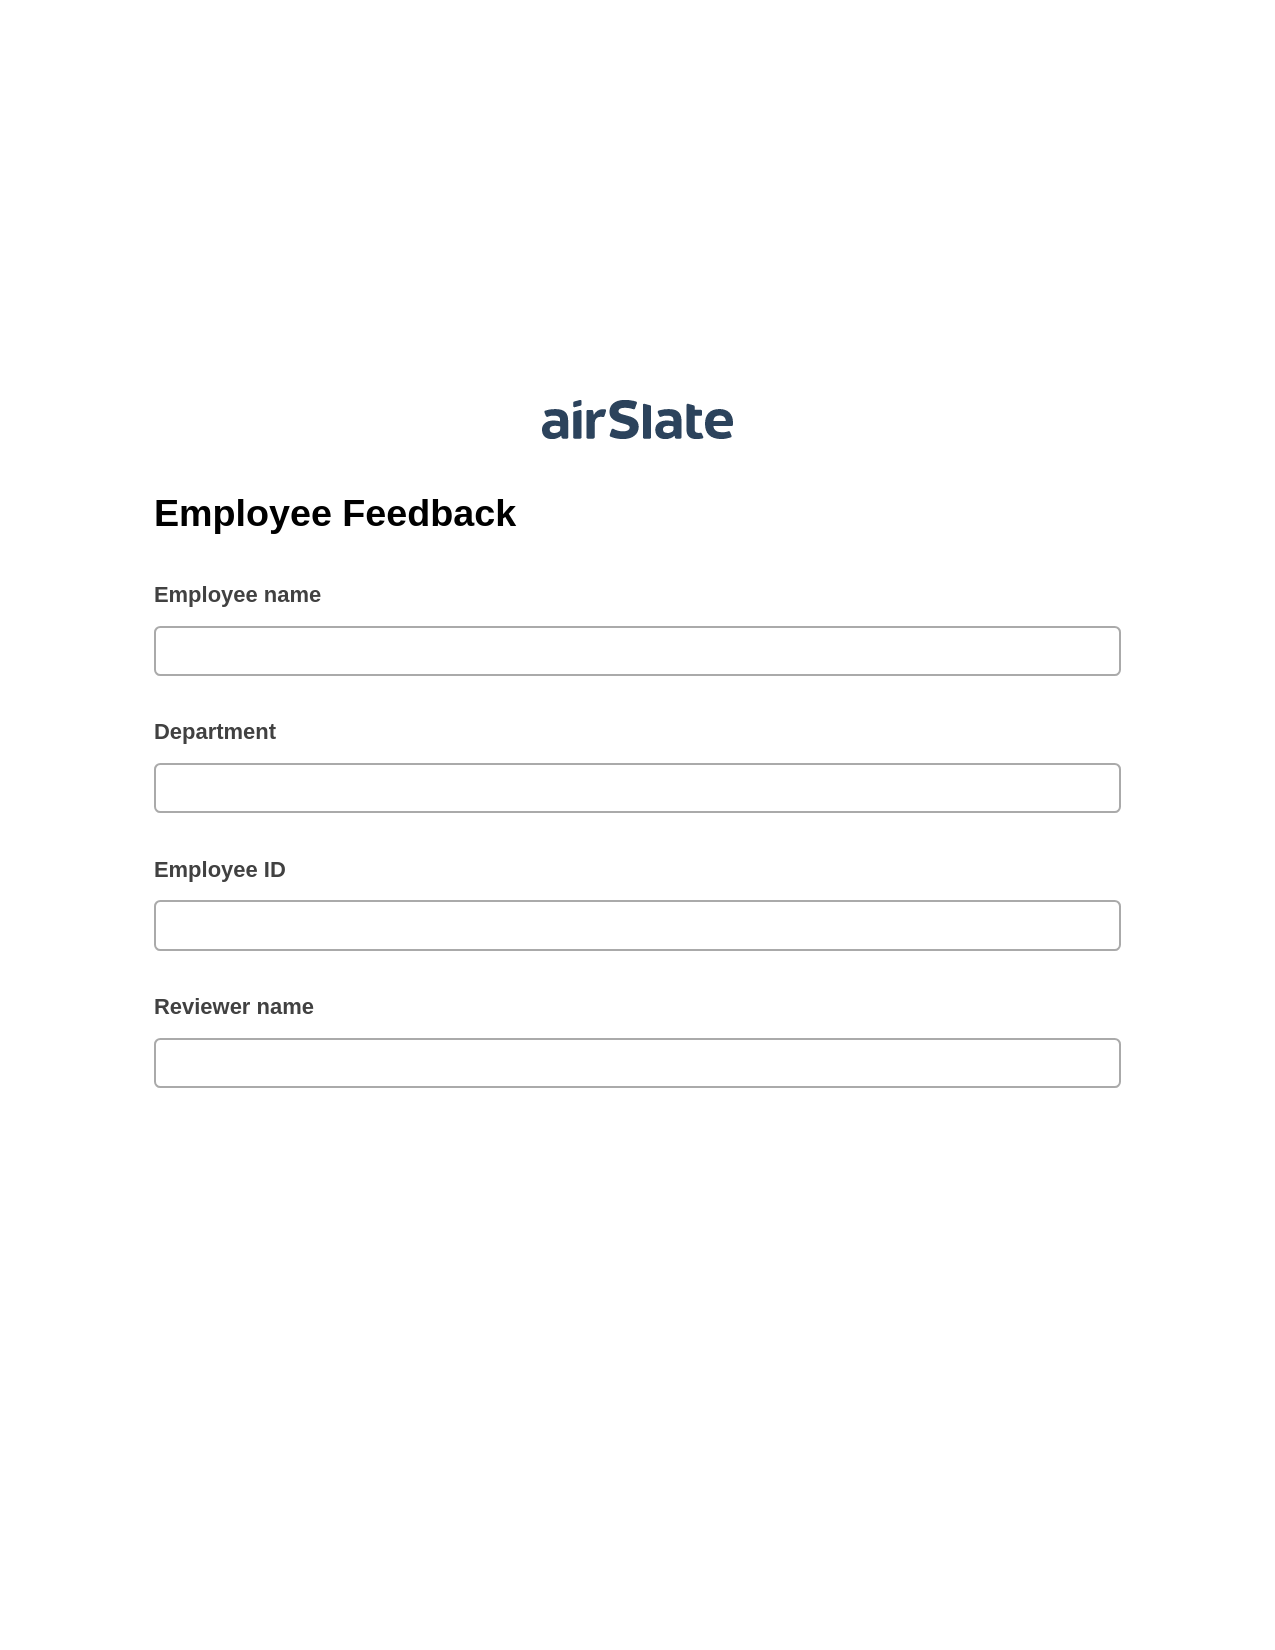 Multirole Employee Feedback Pre-fill from Salesforce Records with SOQL Bot, Webhook Bot, Dropbox Bot